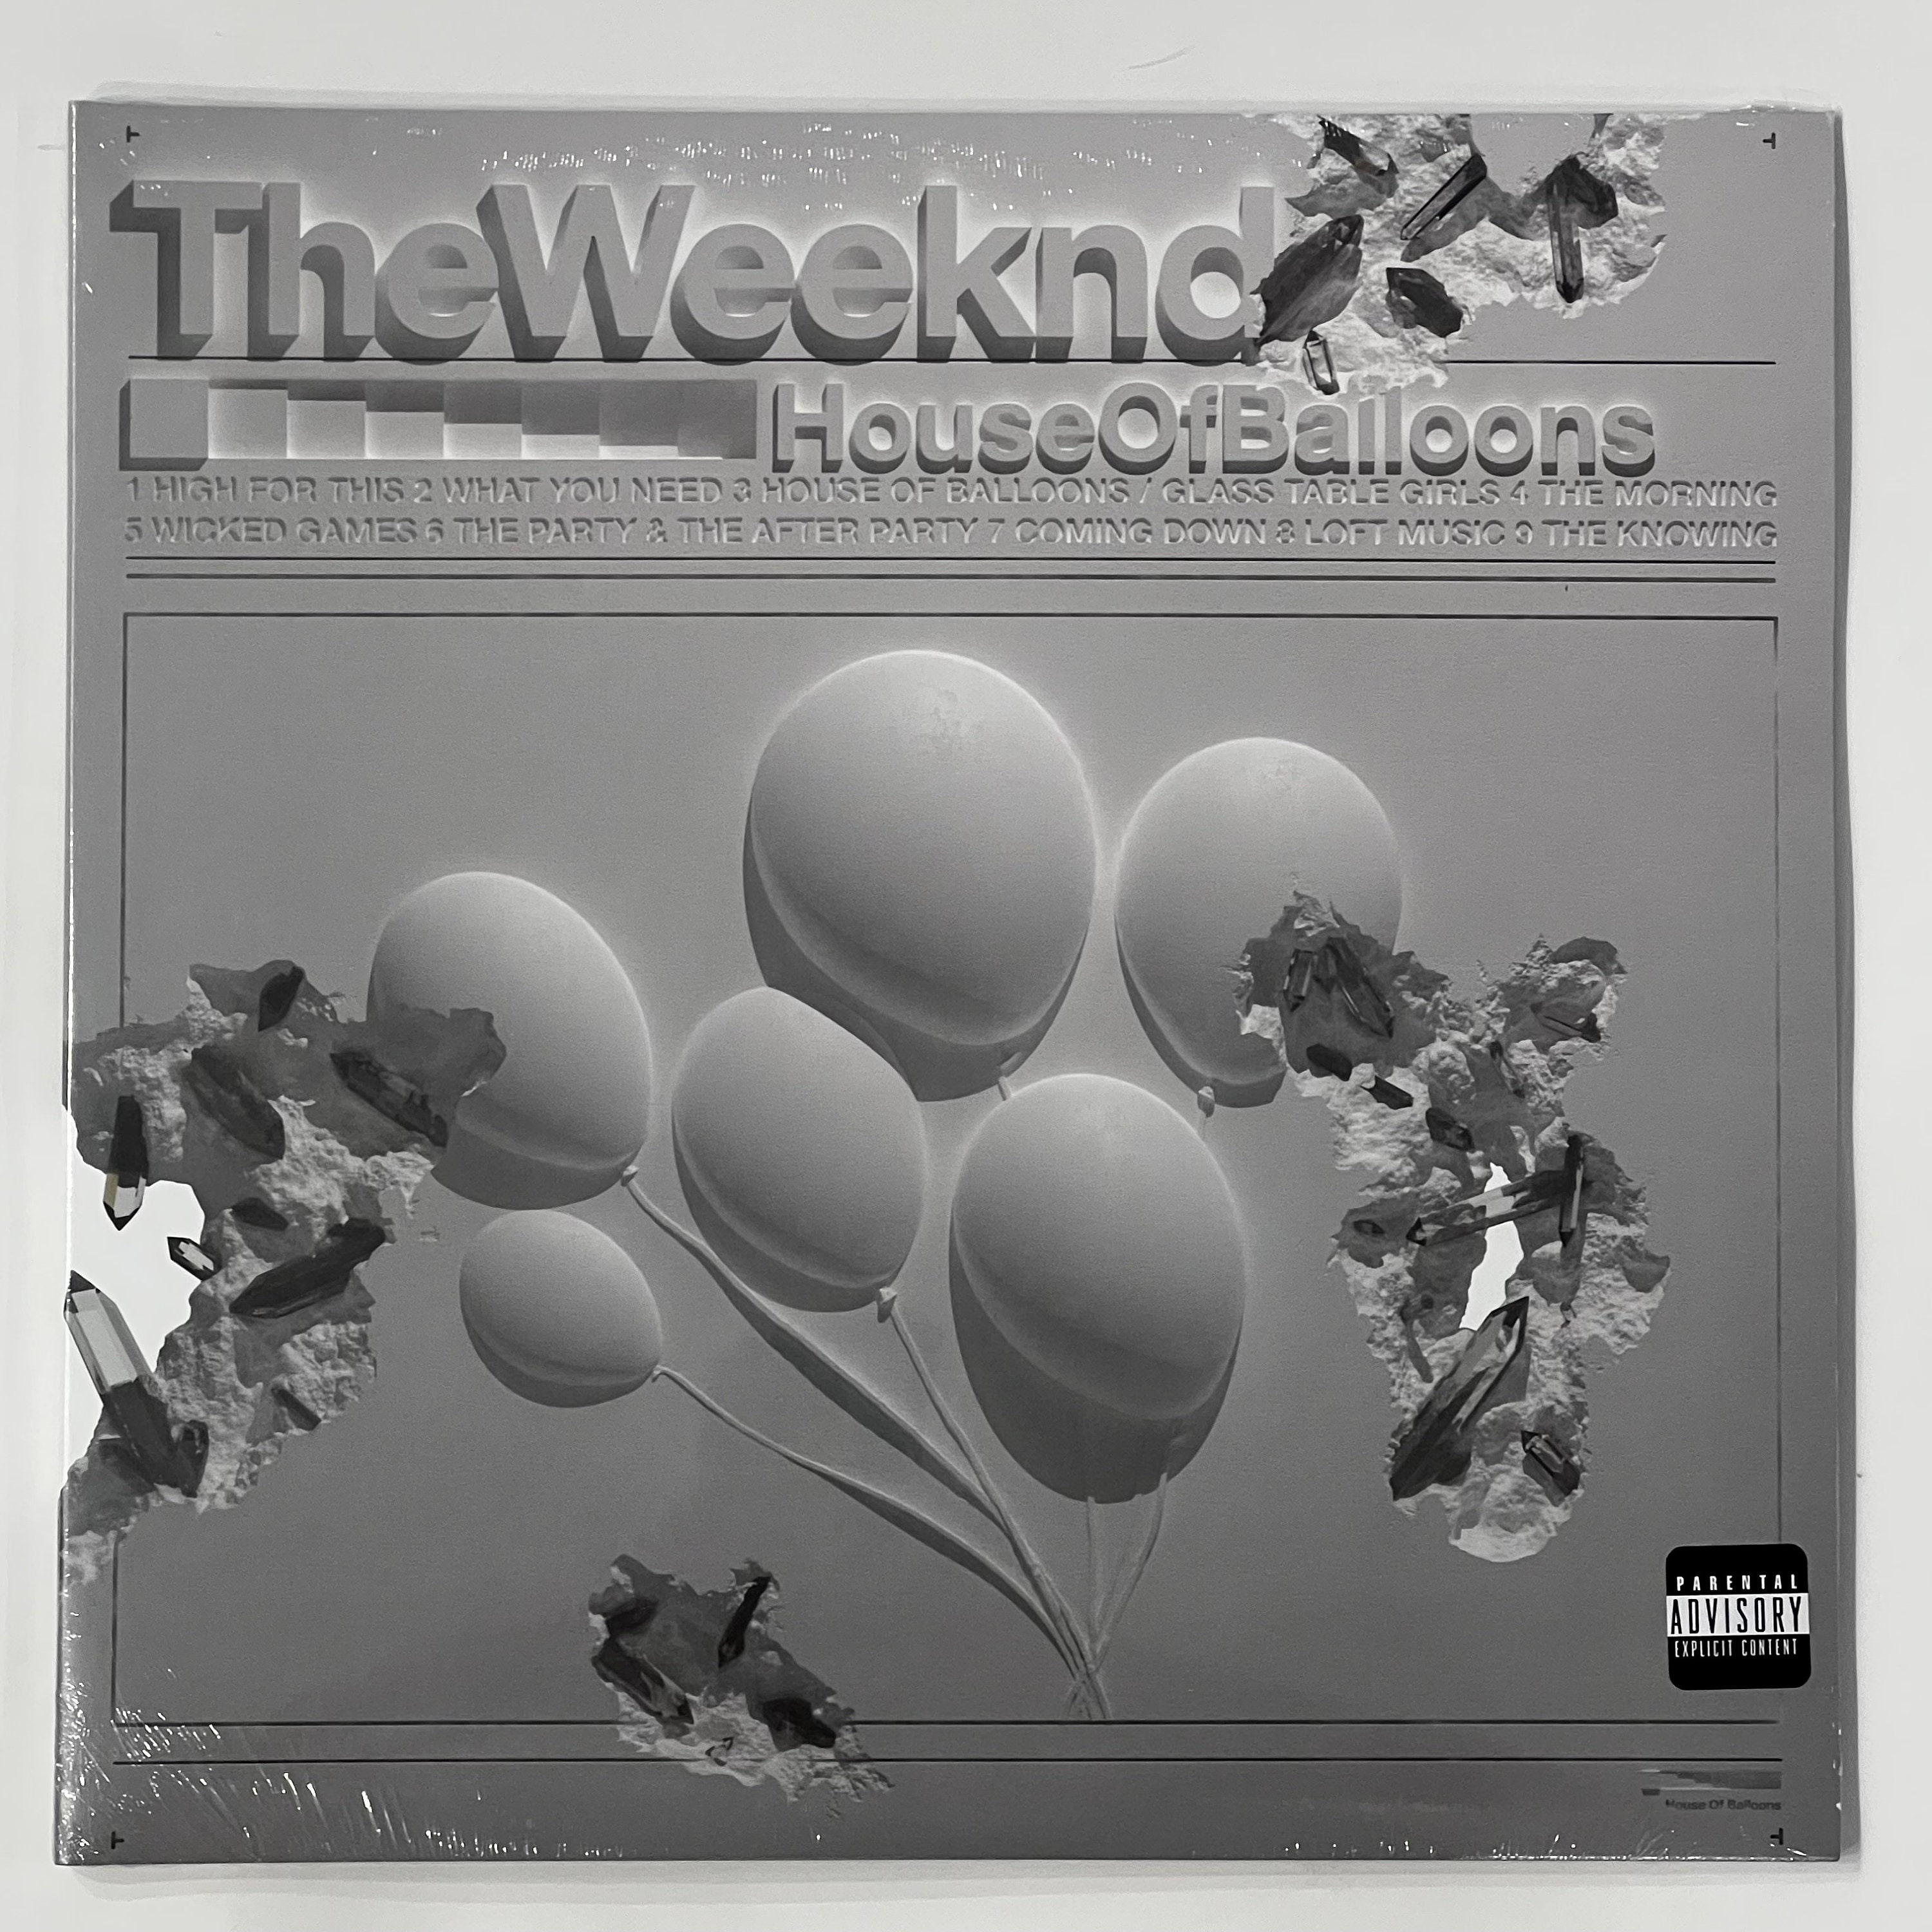 The Weeknd x Daniel Arsham House Of Balloons th Anniversary 2LP Vinyl  Limited Clear " Record